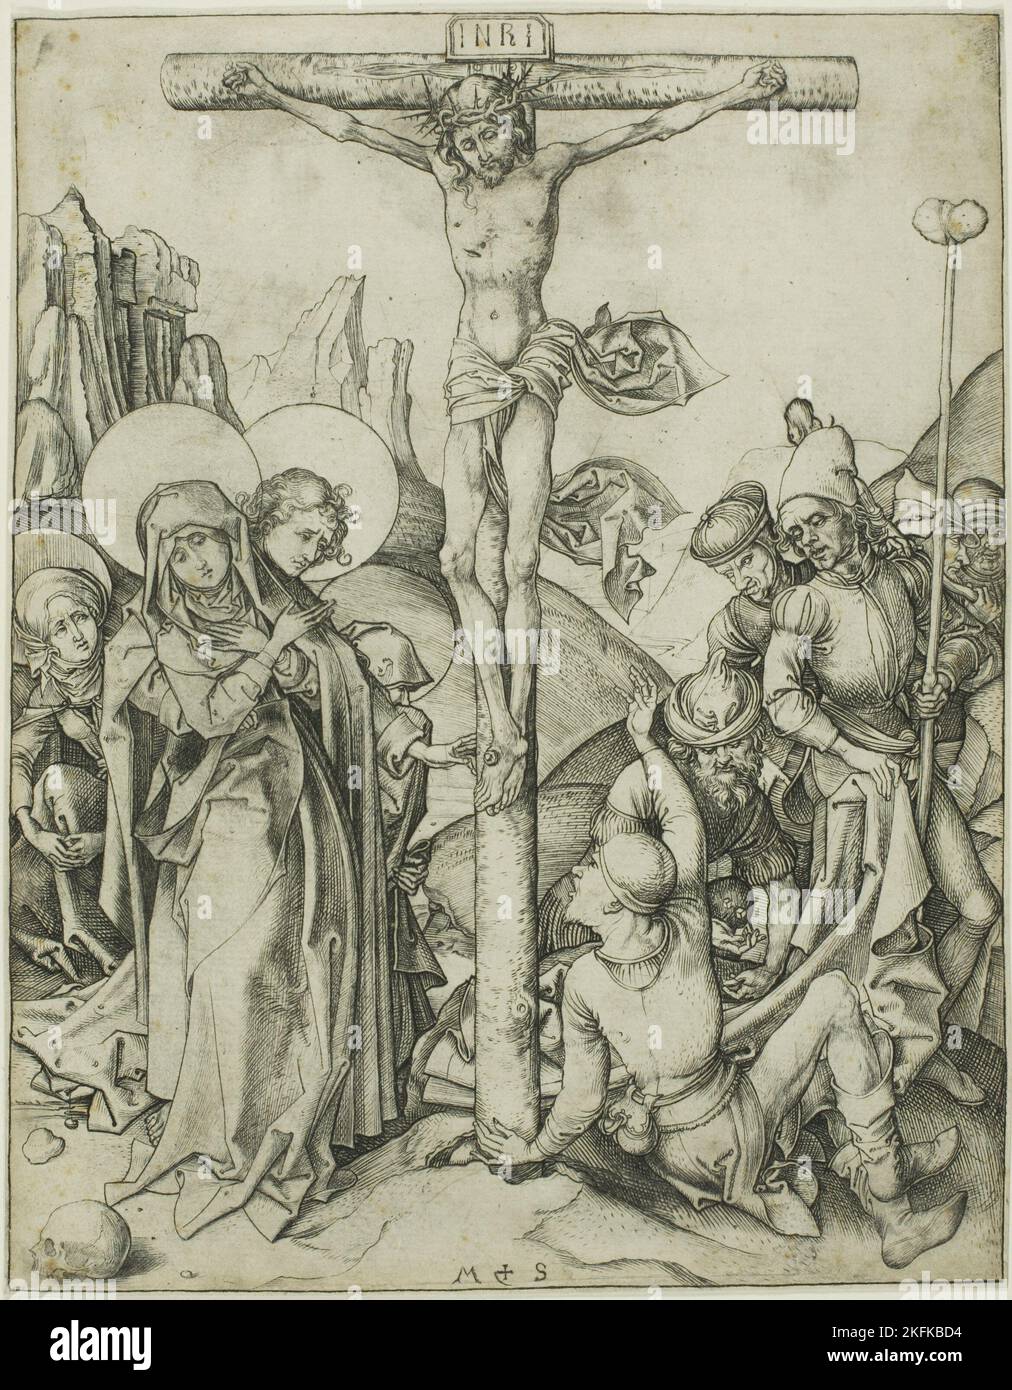 The Crucifixion with the Holy Women, St. John and Roman Soldiers, n.d. Stock Photo